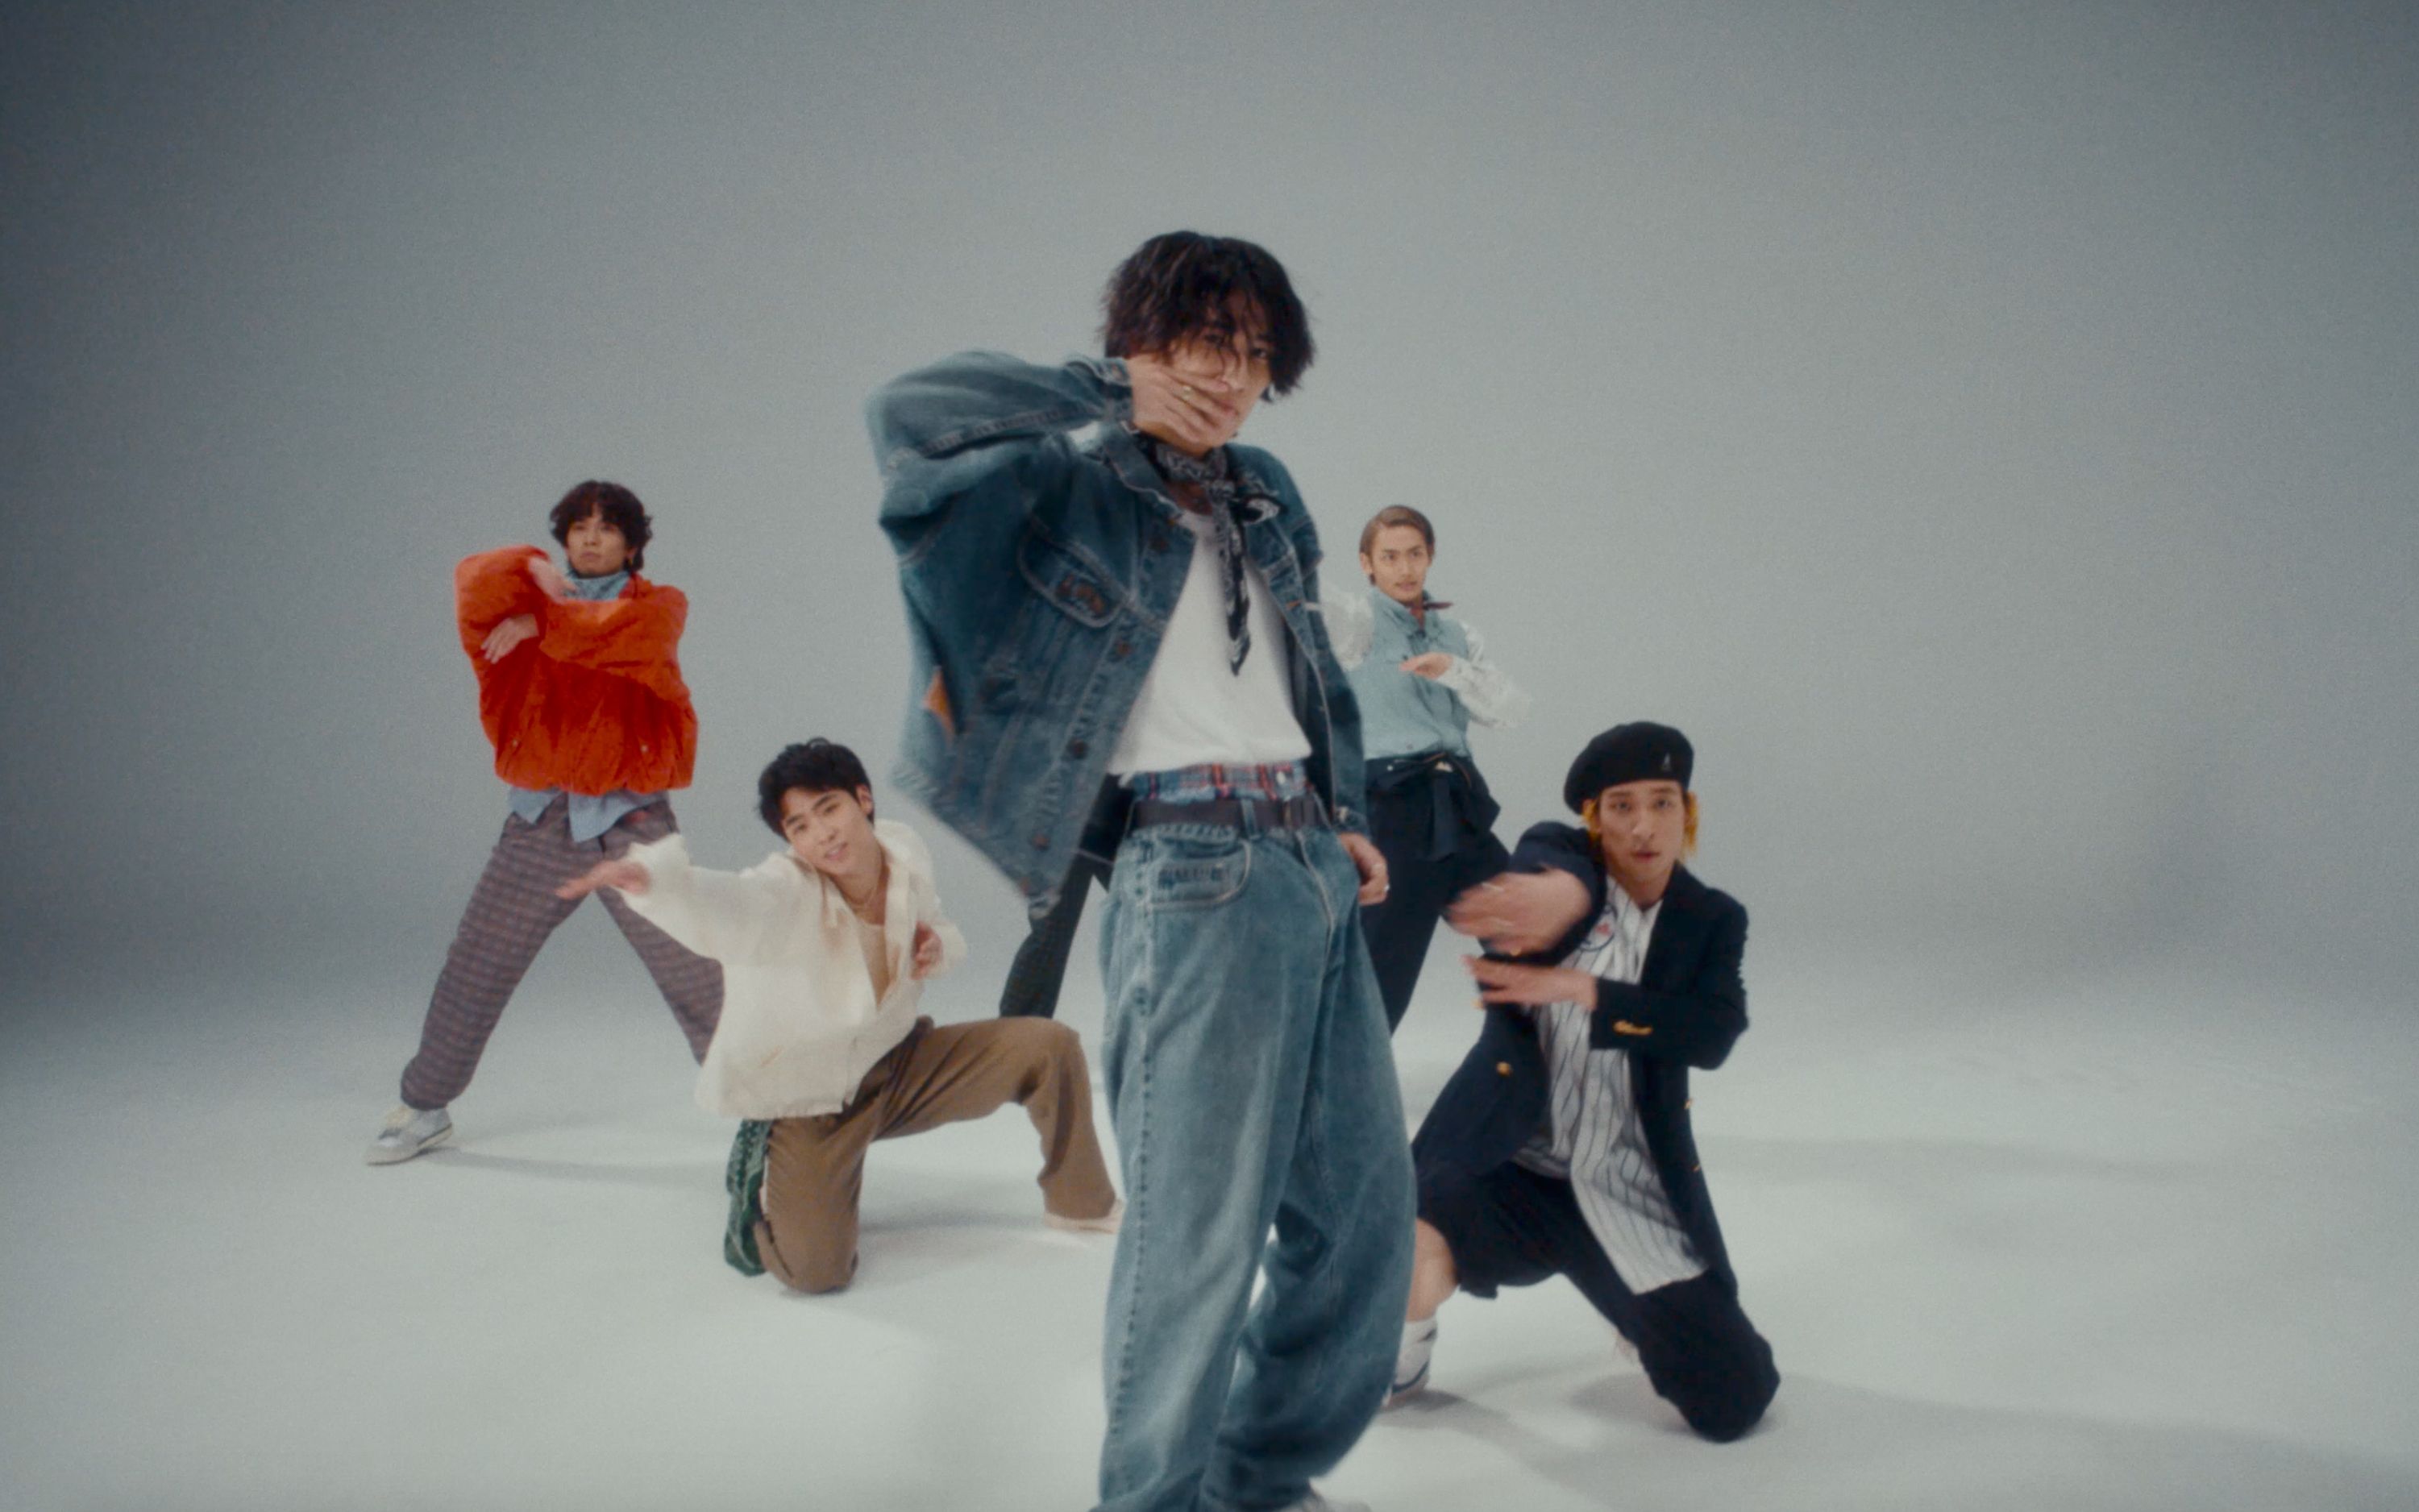 【WATWING】“Let’s get on the beat” MV